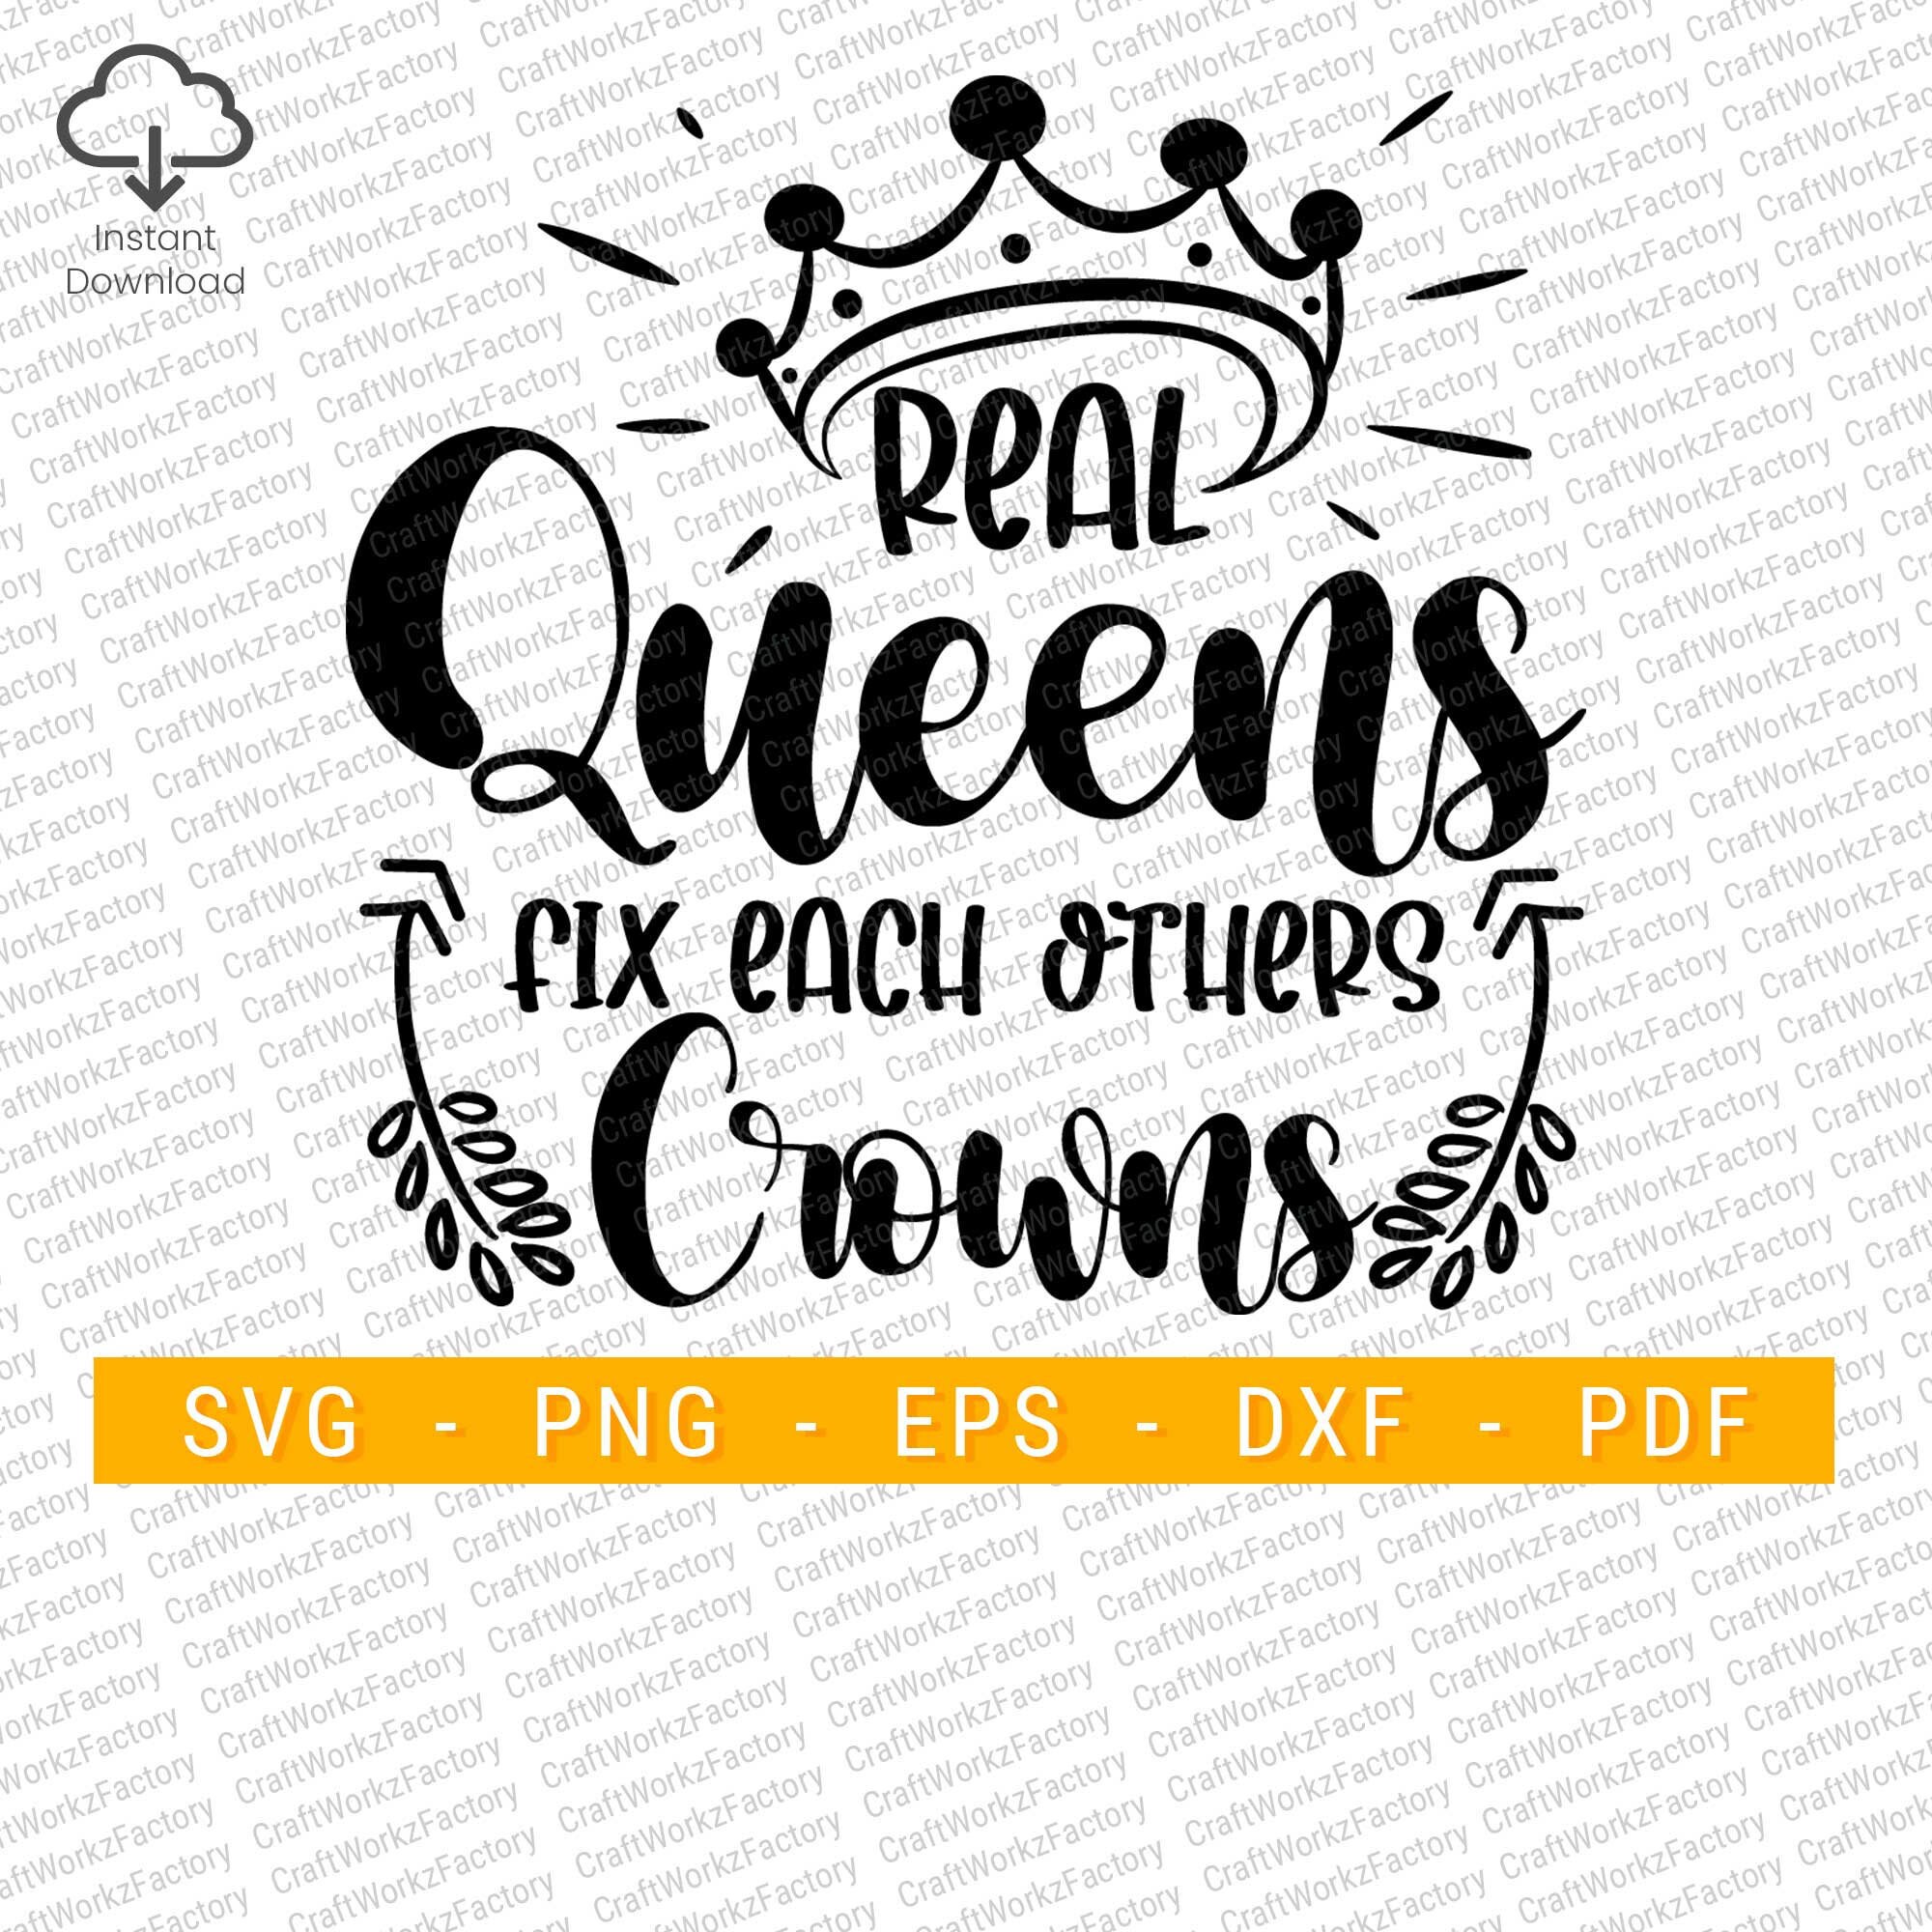 Real Queens Fix Each Other’s Crowns Cat PNG